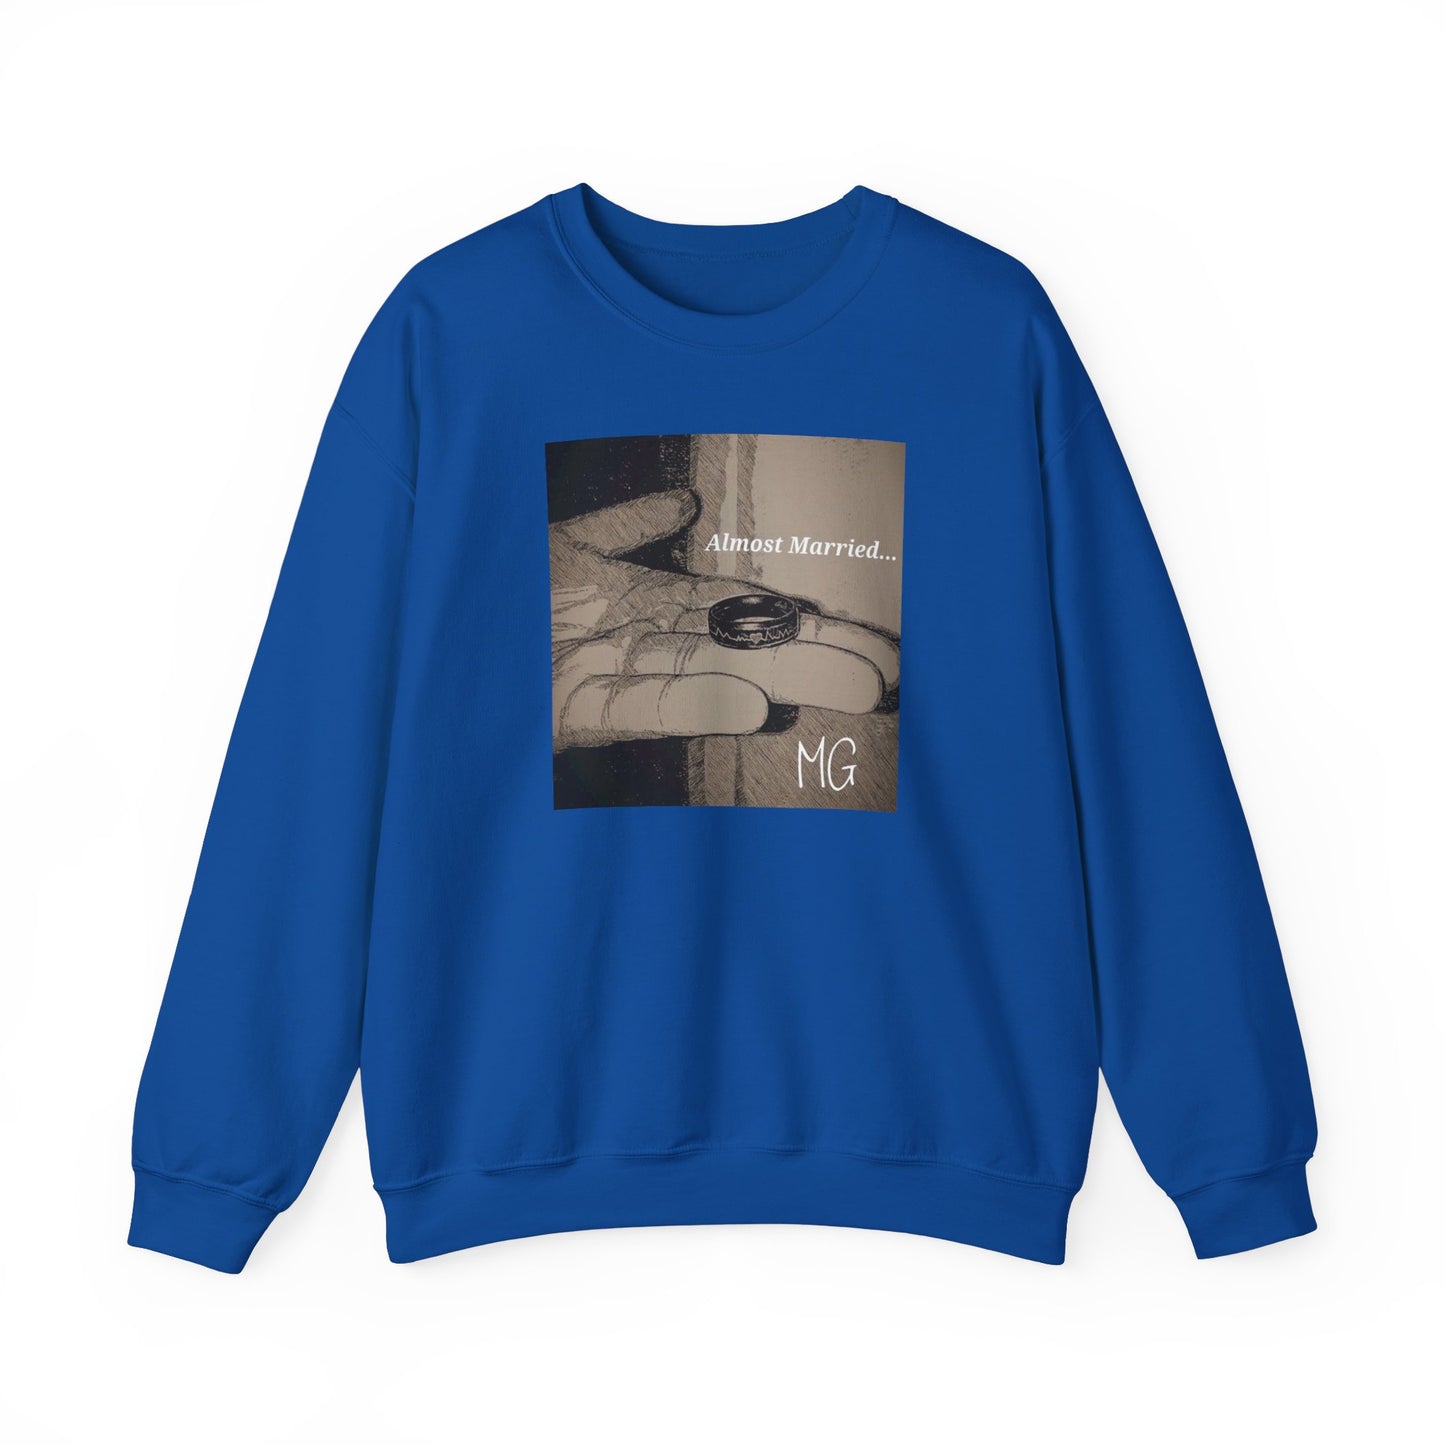 Almost Married MG Crewneck